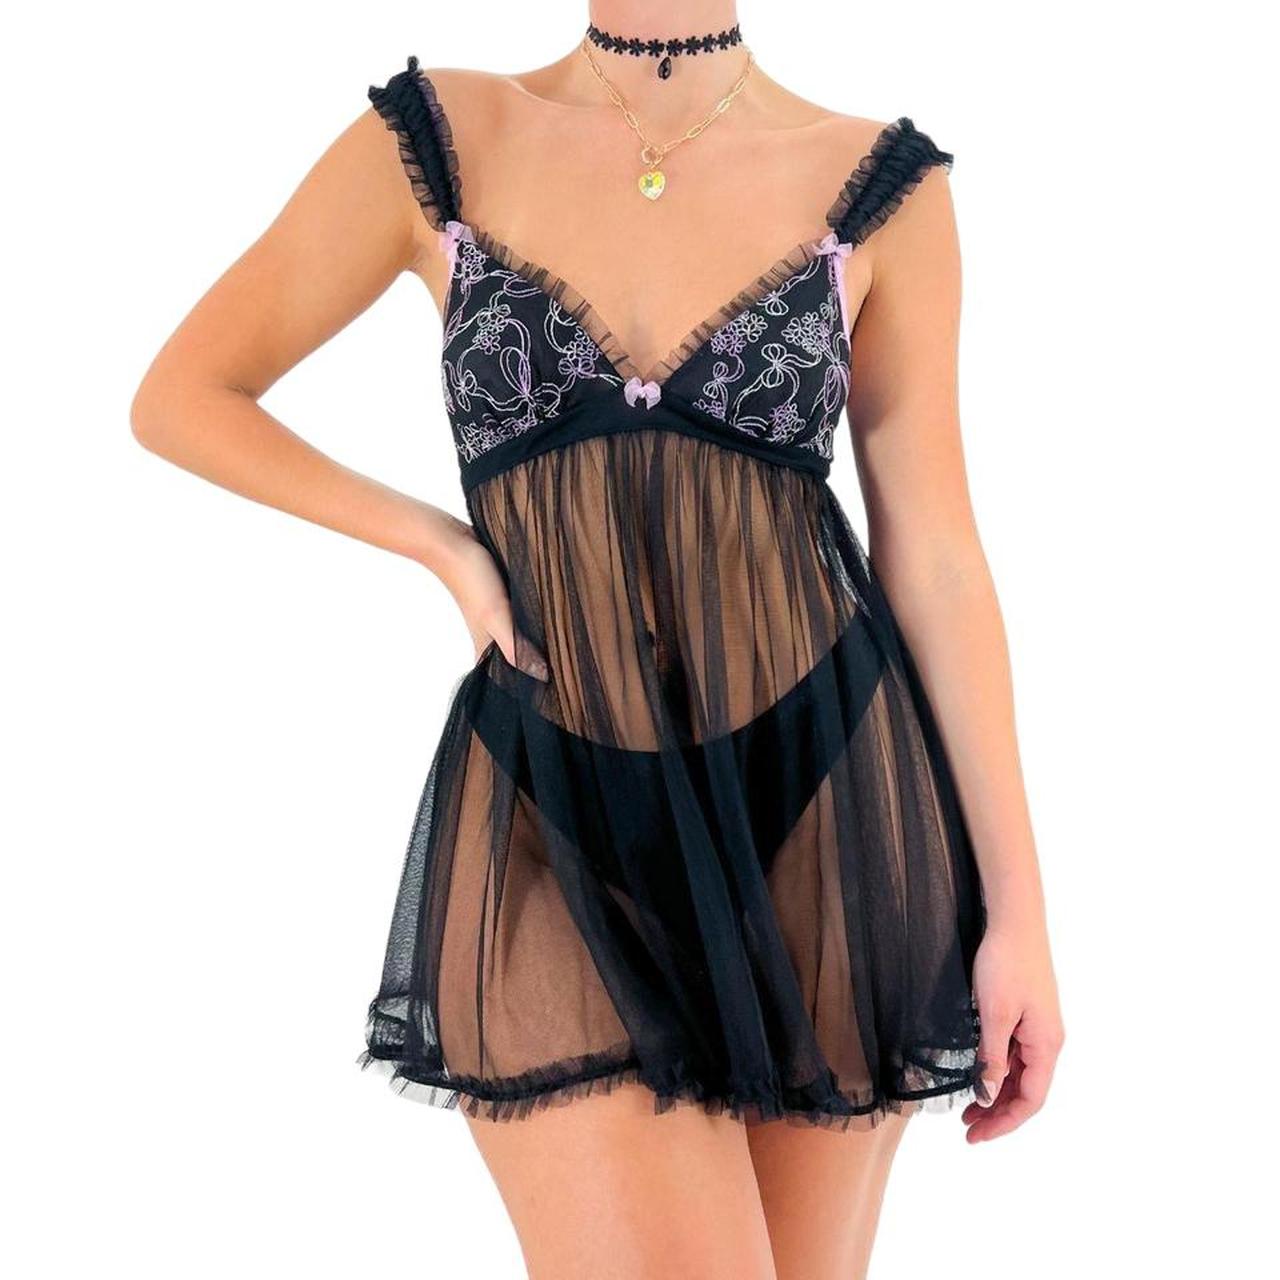 Y2k Vintage Betsey Johnson Black Mesh Slip Dress w/ Pink Bow Embroidery W/ Ruffle Straps + lace Up Back [M]